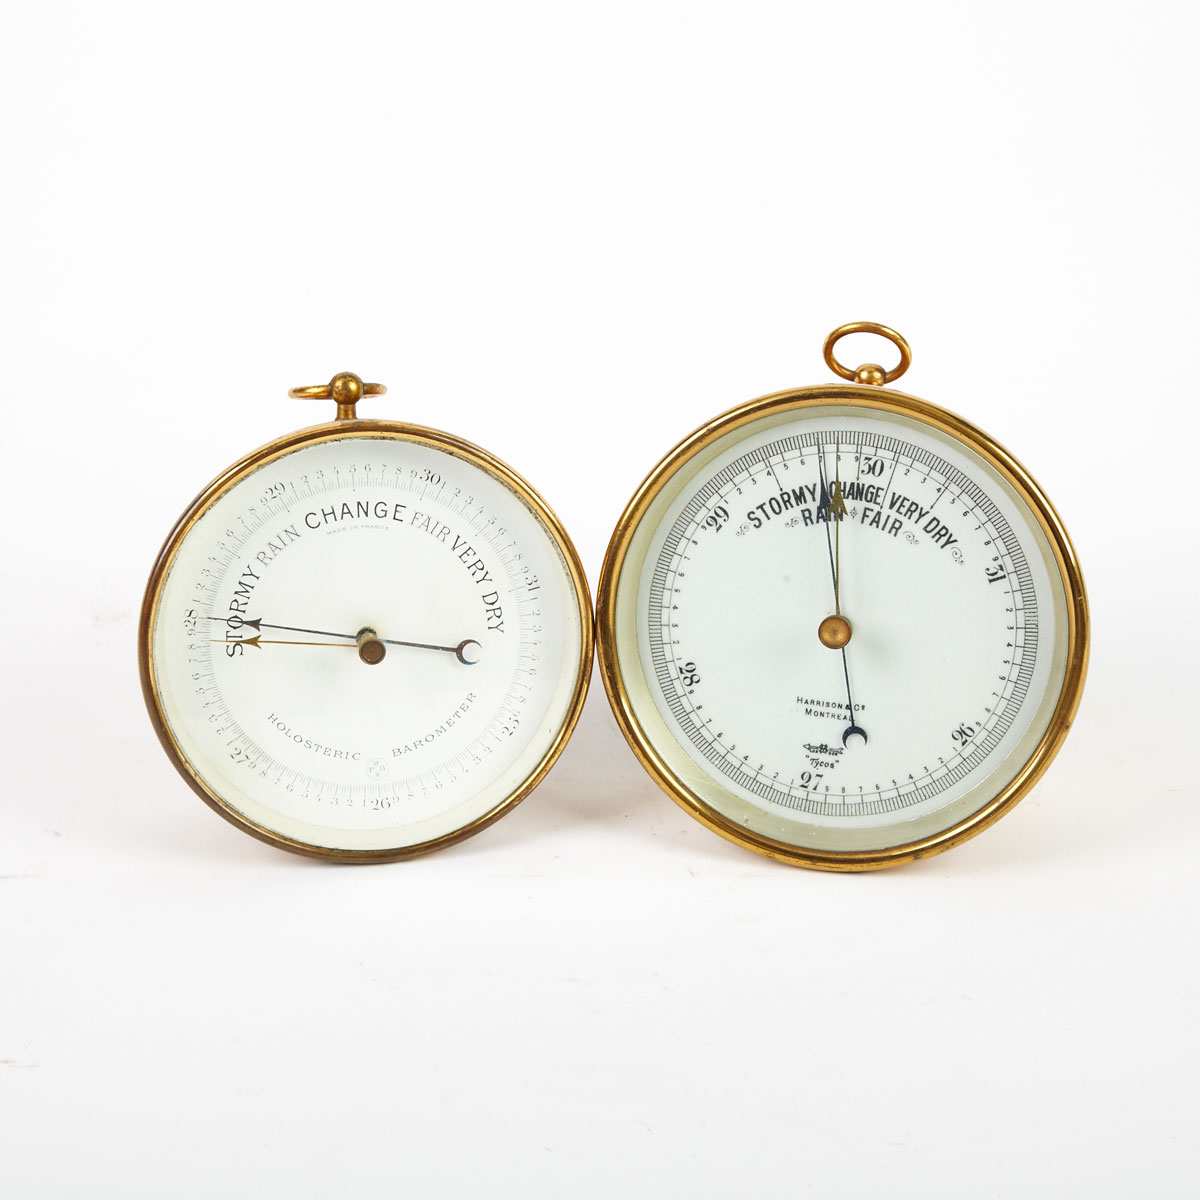 Two Brass Marine Aneroid Barometers 17a257